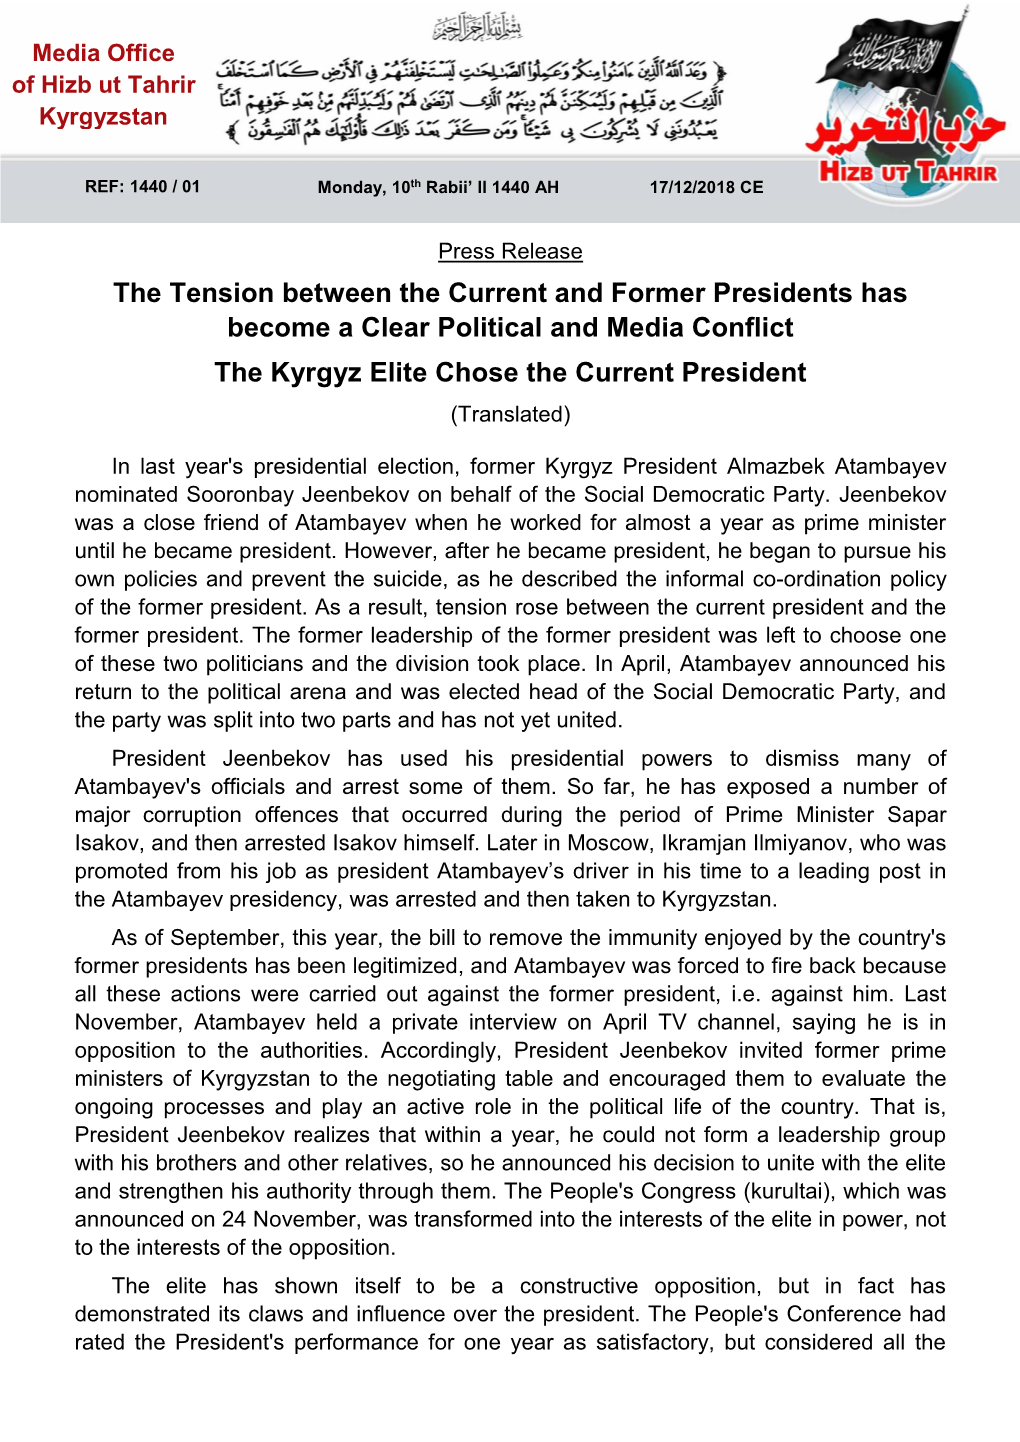 The Tension Between the Current and Former Presidents Has Become a Clear Political and Media Conflict the Kyrgyz Elite Chose the Current President (Translated)